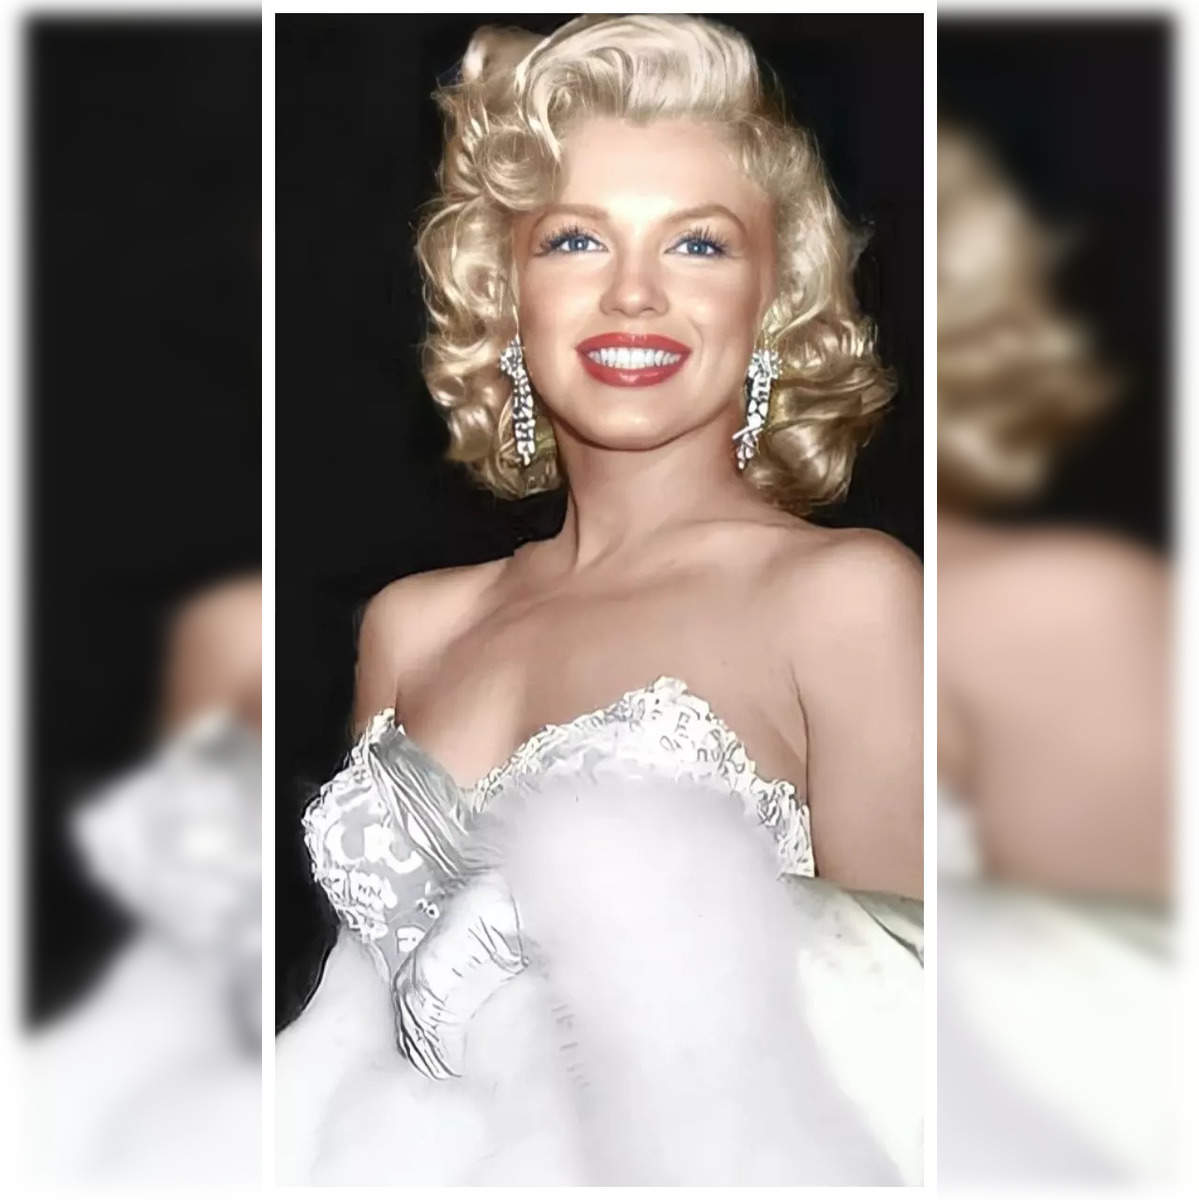 Marilyn Monroe death: What happened to Marilyn Monroe's body post her death?  Read here - The Economic Times